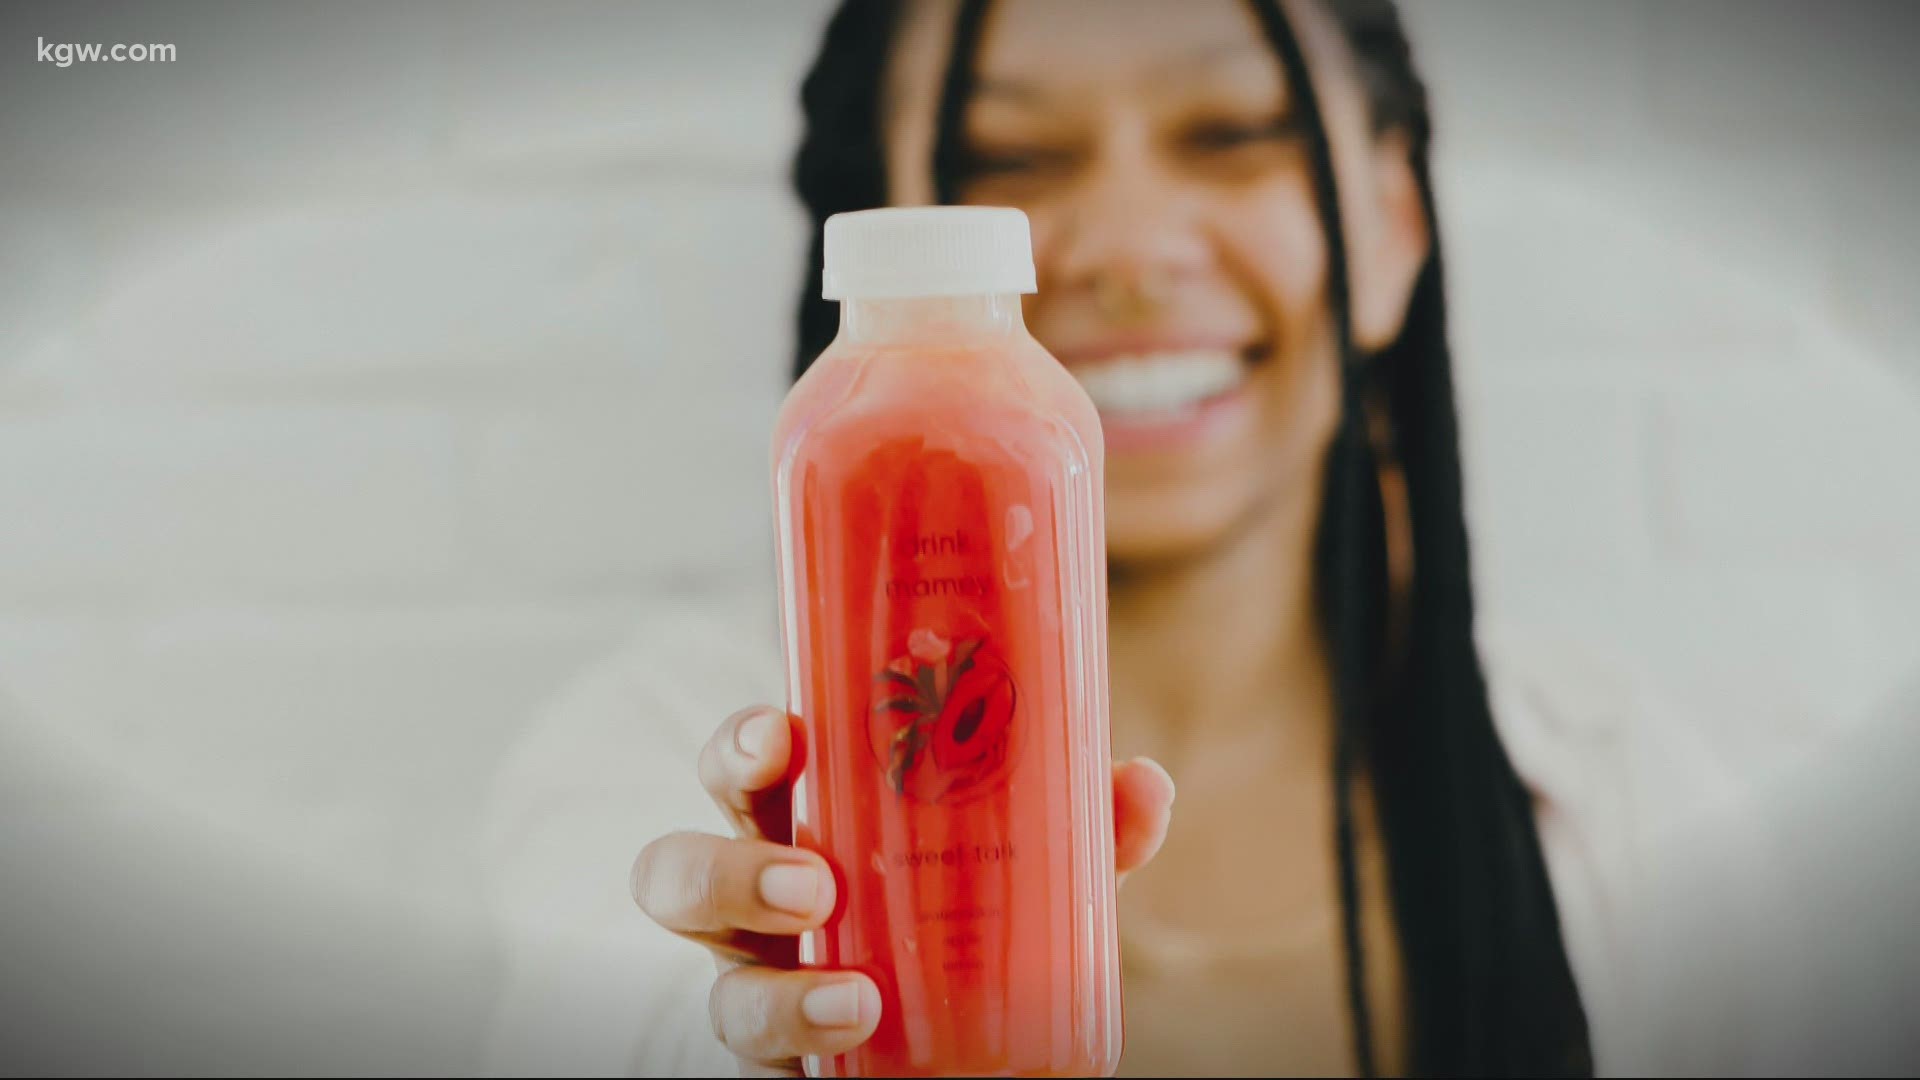 Drink Mamey offers smoothies and juices, along with space for local small business owners to showcase their product.